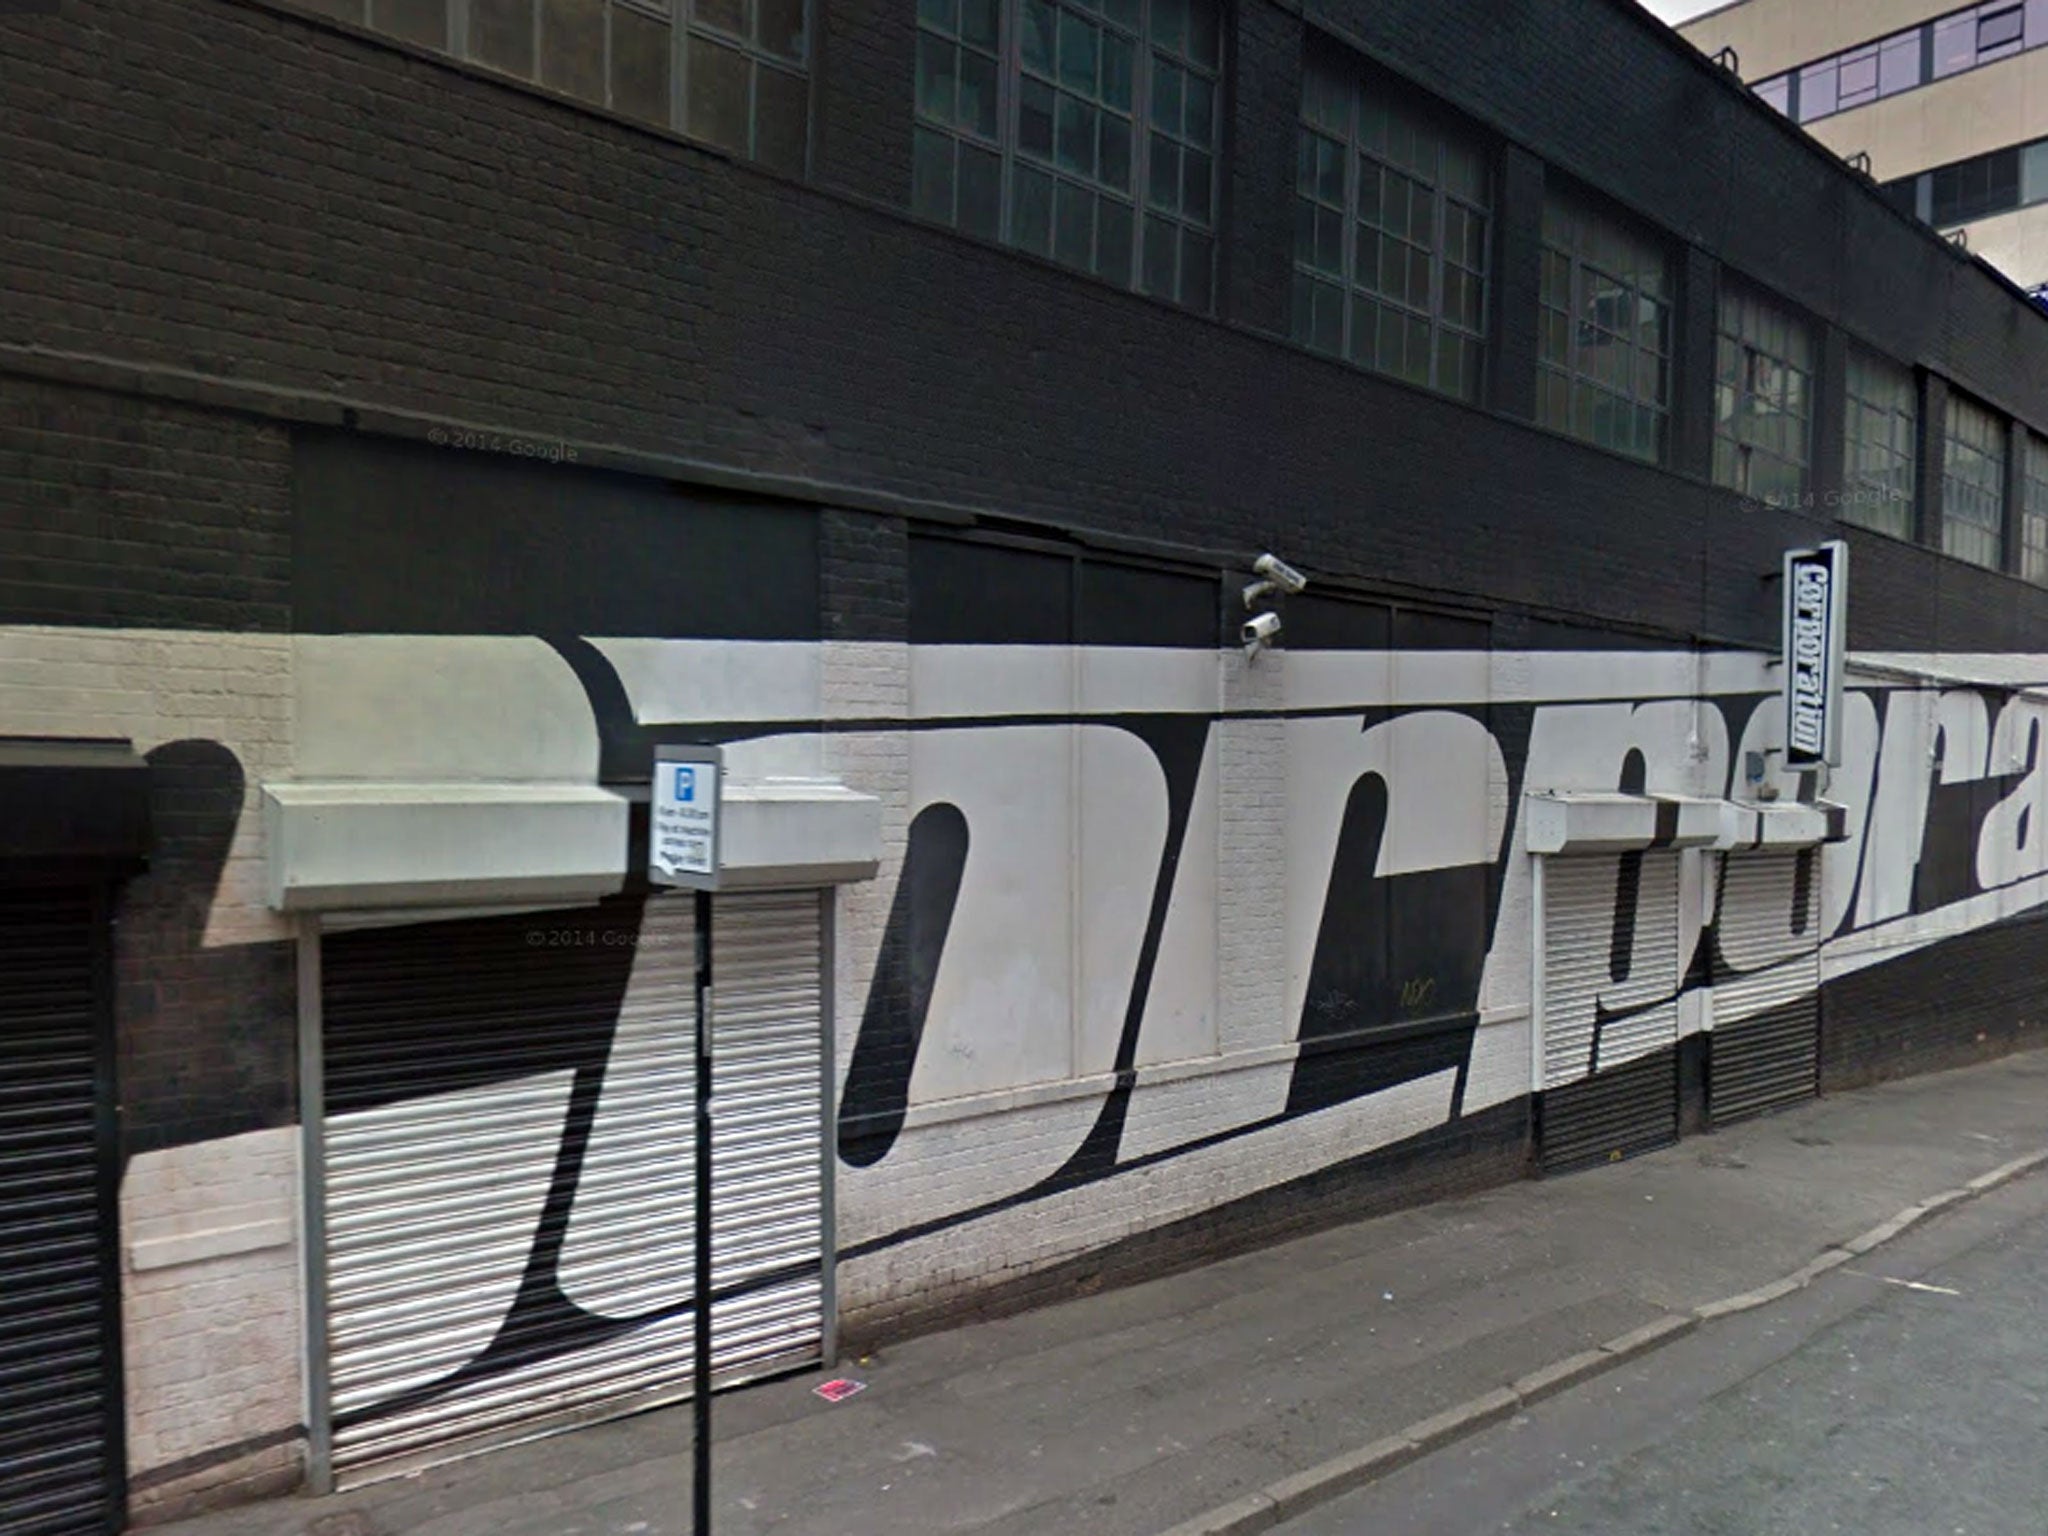 Corporation in Sheffield, where a bouncer allegedly made abusive comments towards a student